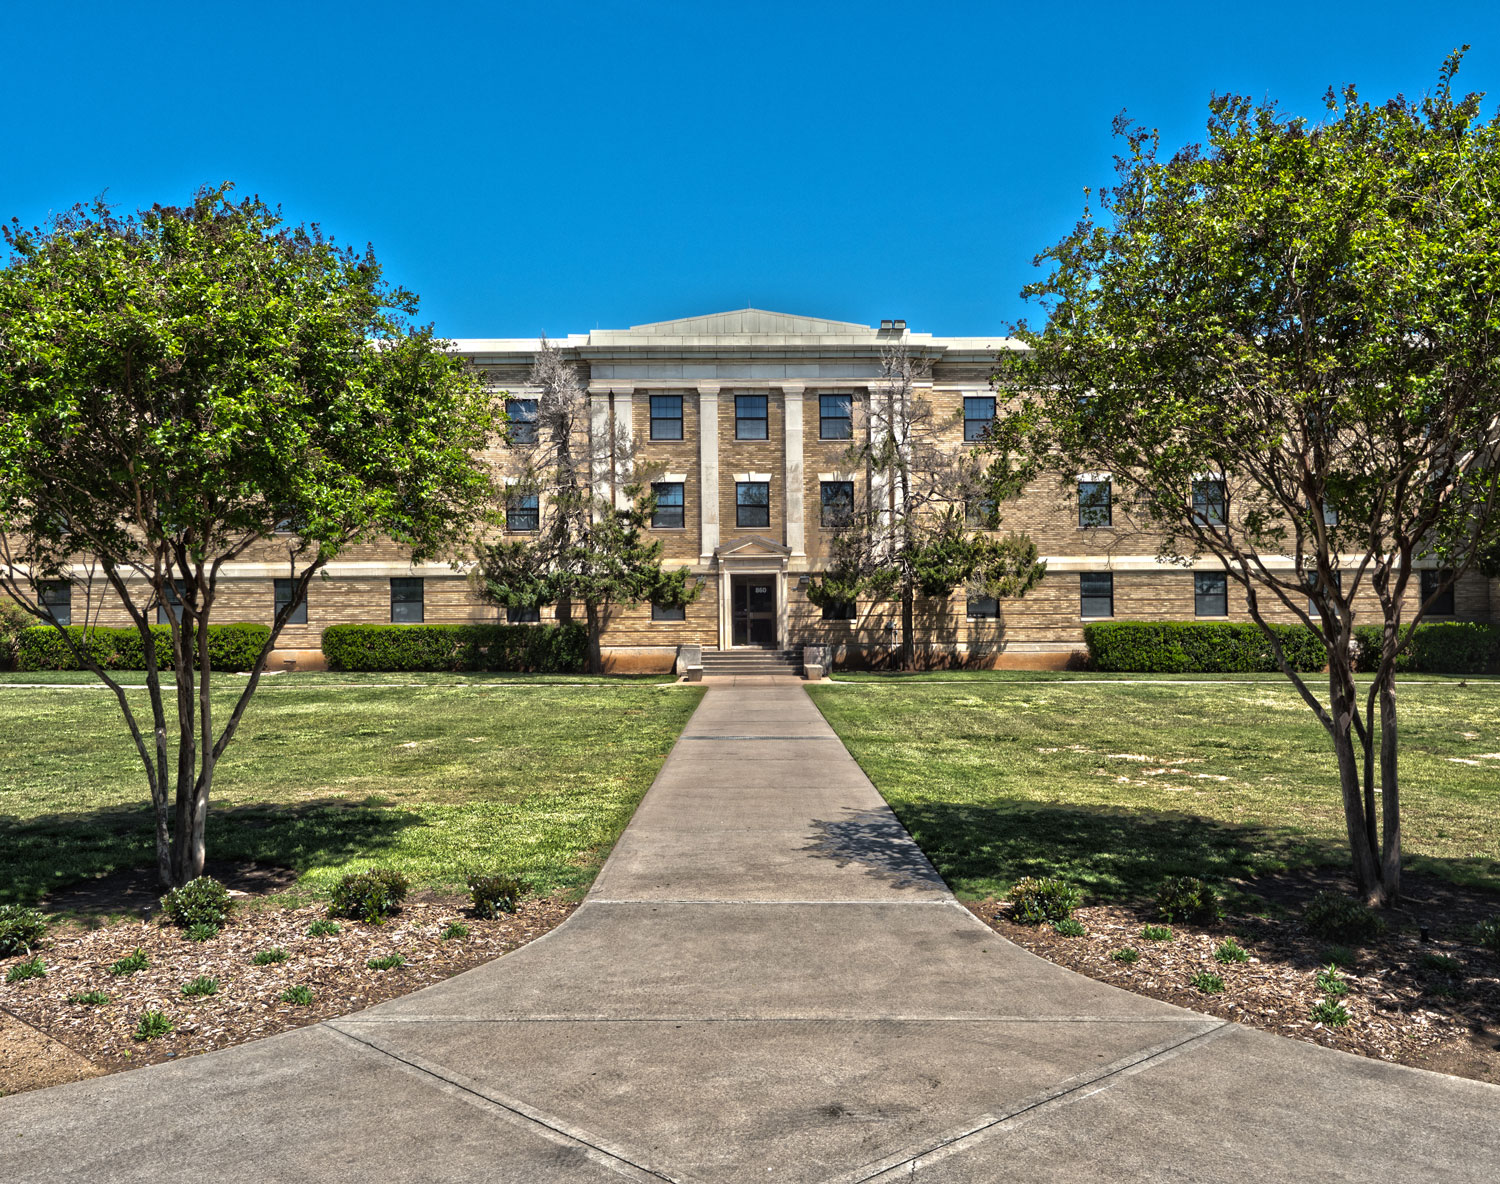 The Nelson Hall for first-year female students at ACU